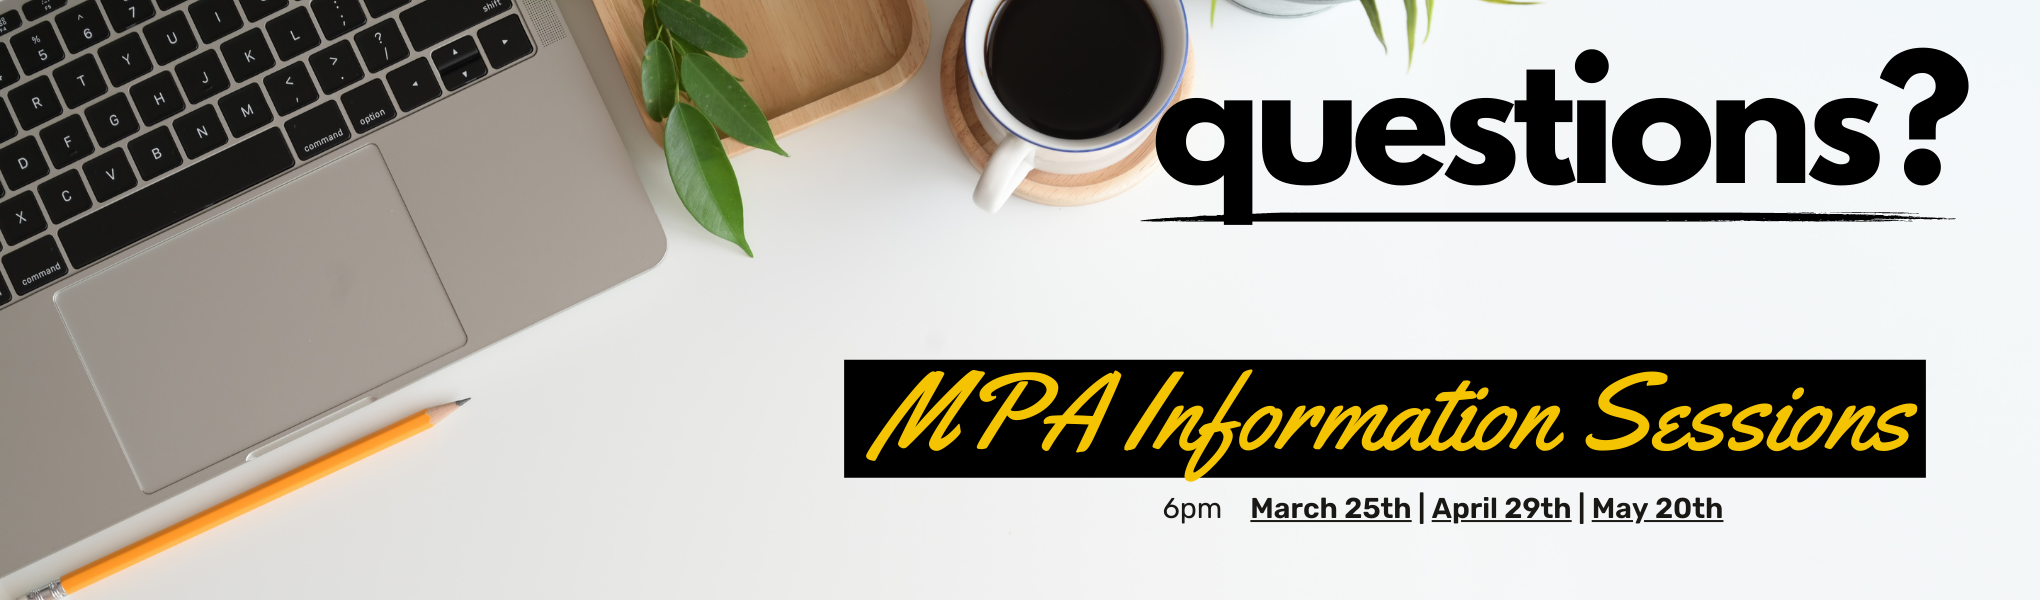 Questions? MPA Information Sessions, 6 pm, March 25, 2022, April 29, 2022, and May 20, 2022